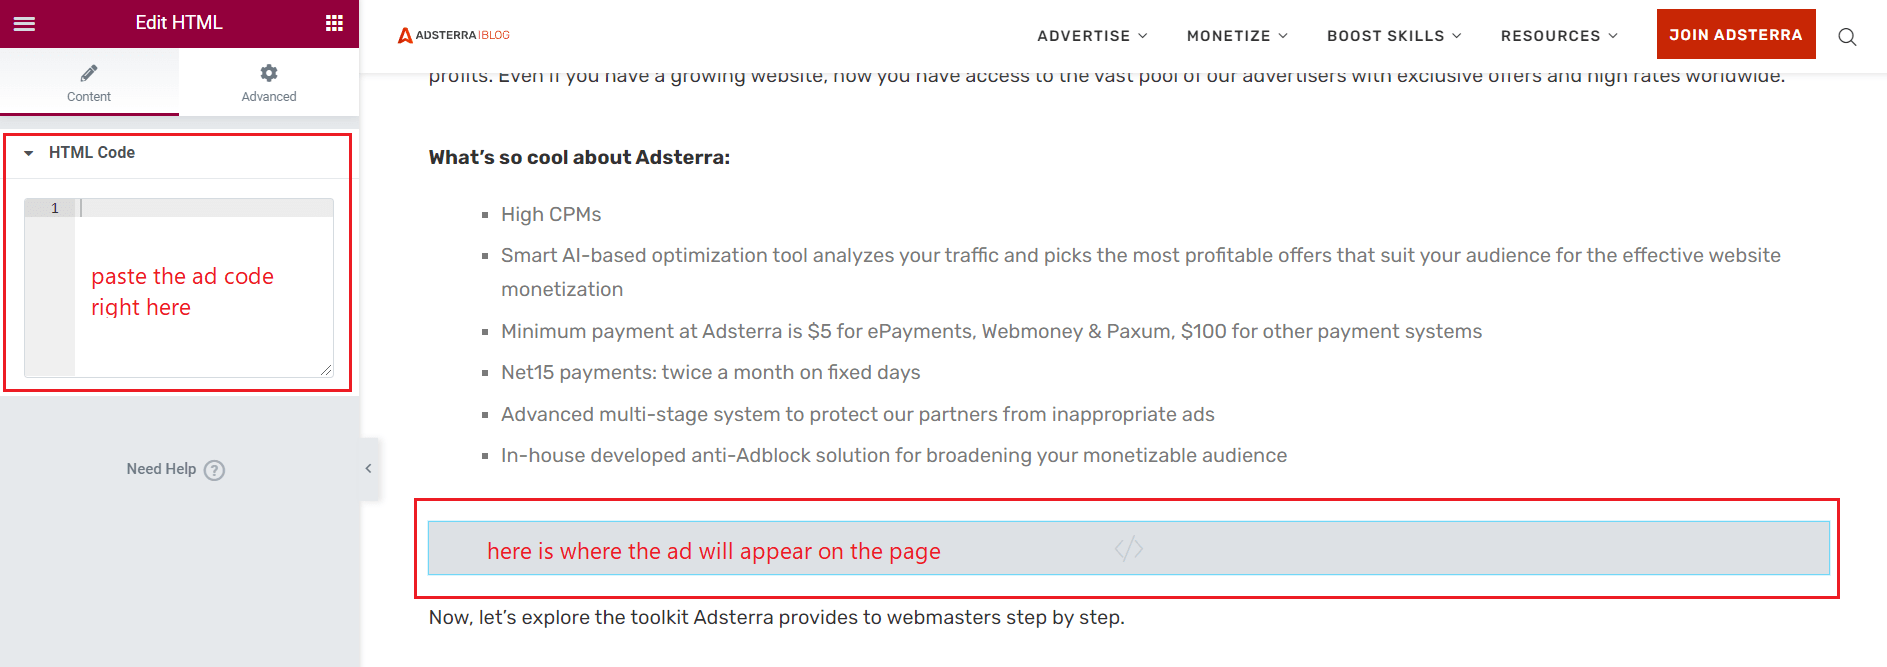 How to place Adsterra ads with HTML widget by Elementor